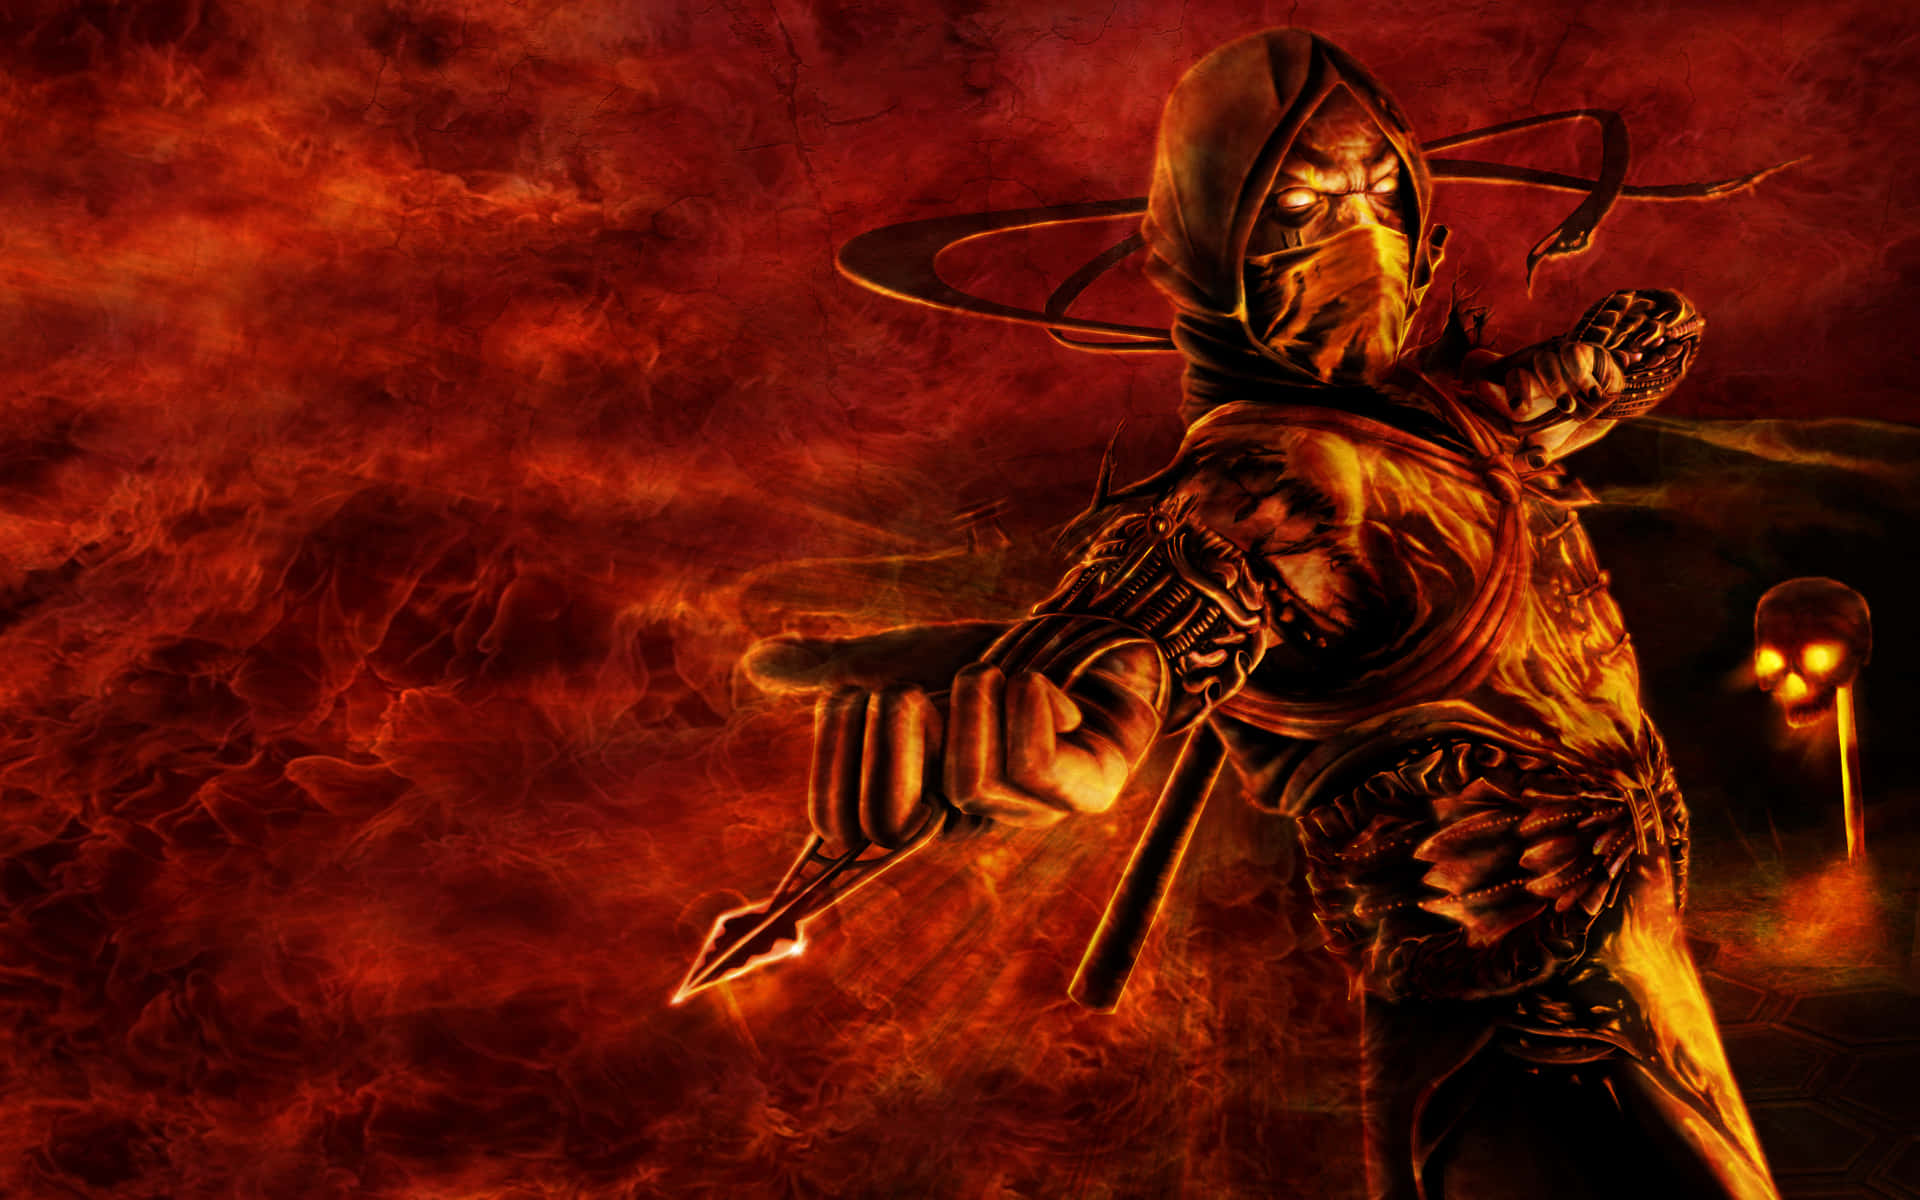 "Witness the legendary character Scorpion from Mortal Kombat in all his glory" Wallpaper